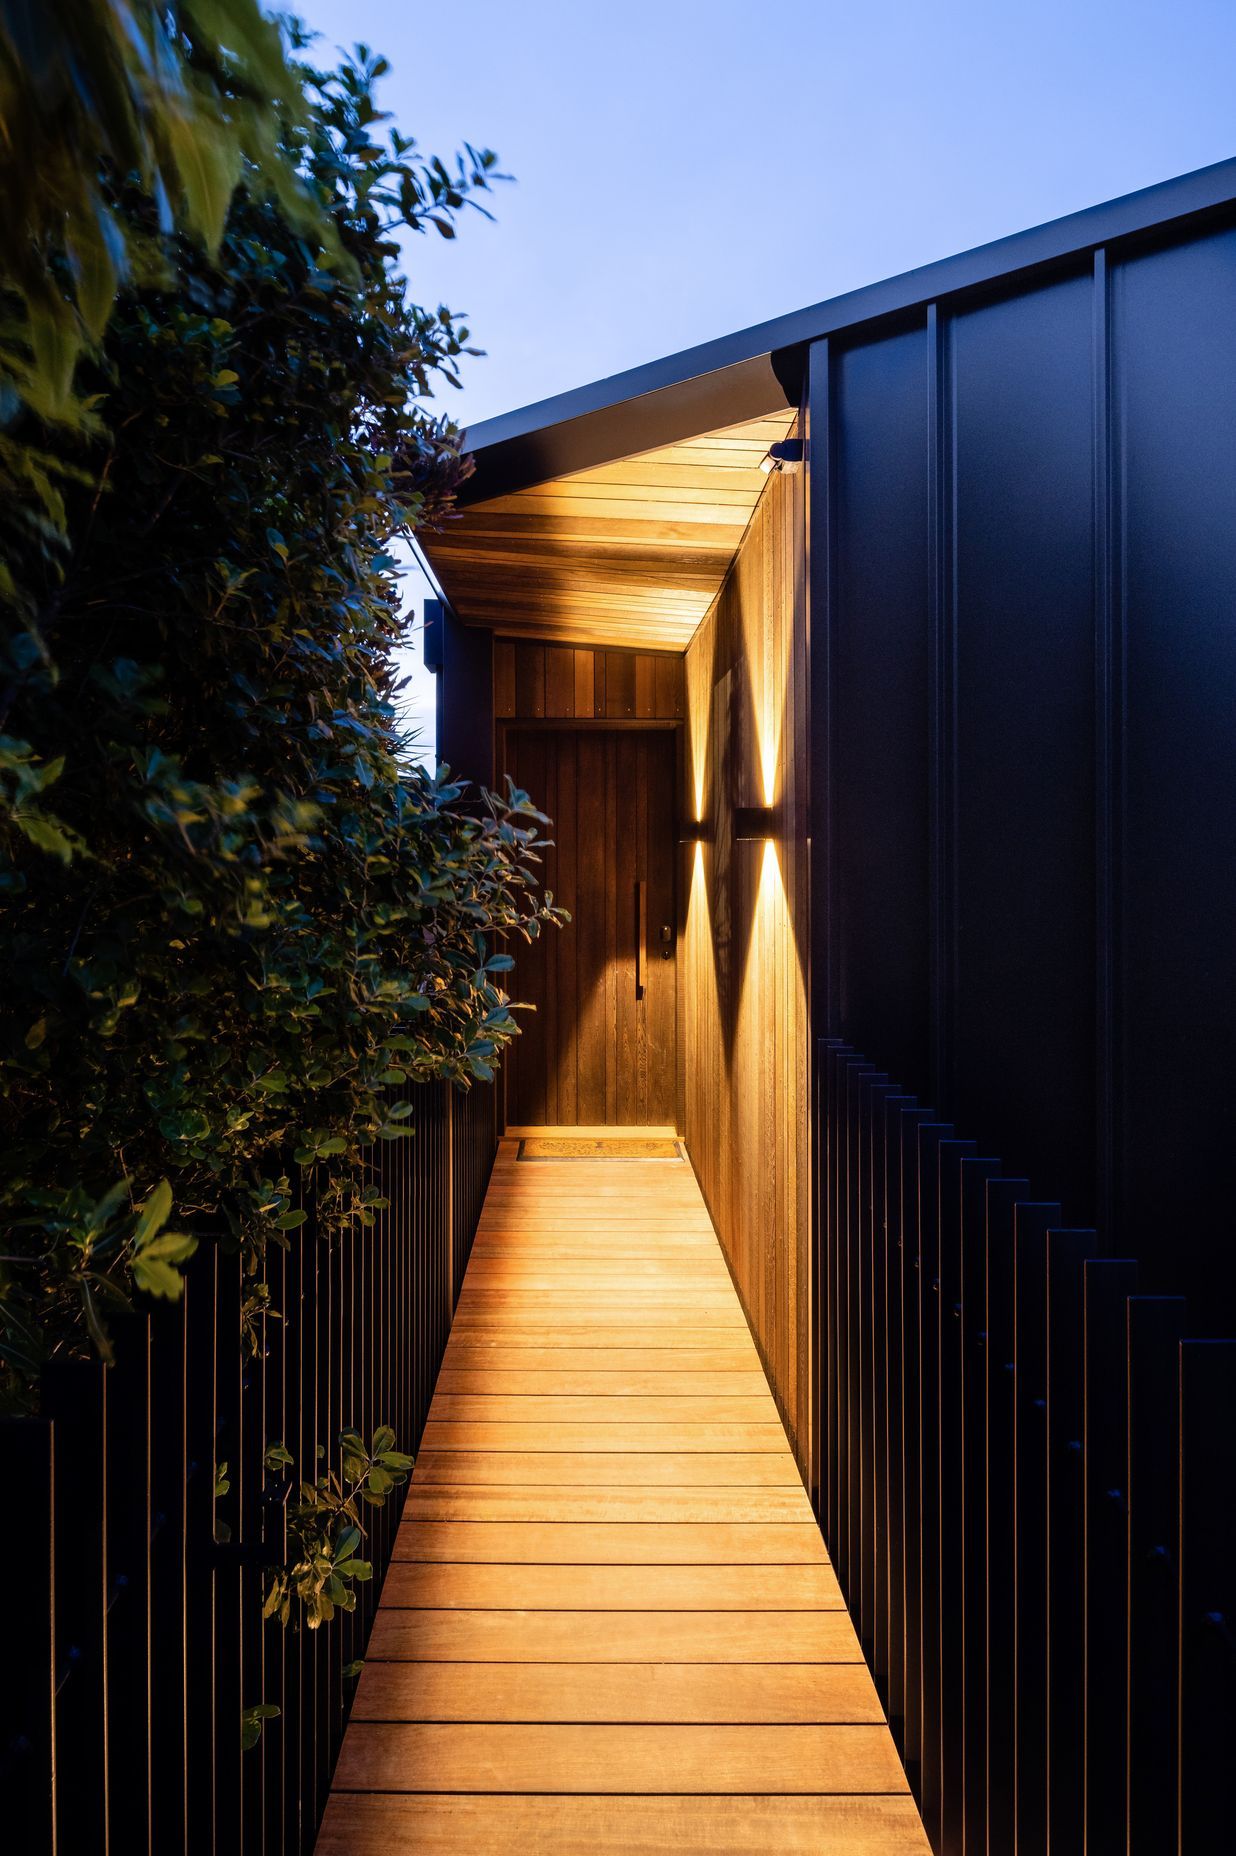 Approaching the entry, the boardwalk is lit up, casting sculptural shadows on the home.